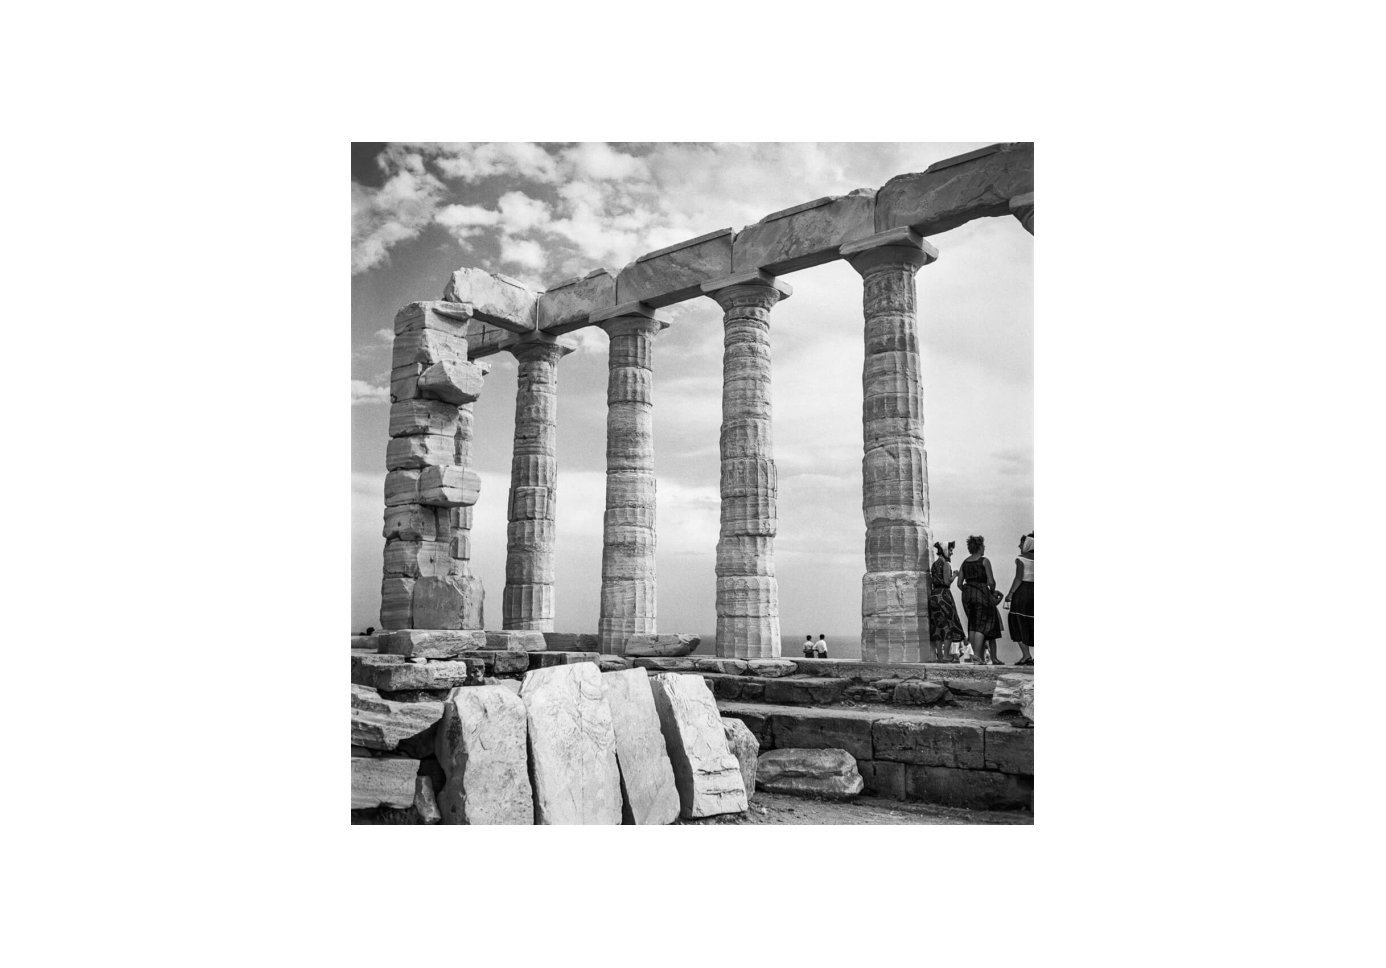 Visitors at the Temple of Poseidon, Sounion. Photograph by Robert McCabe.